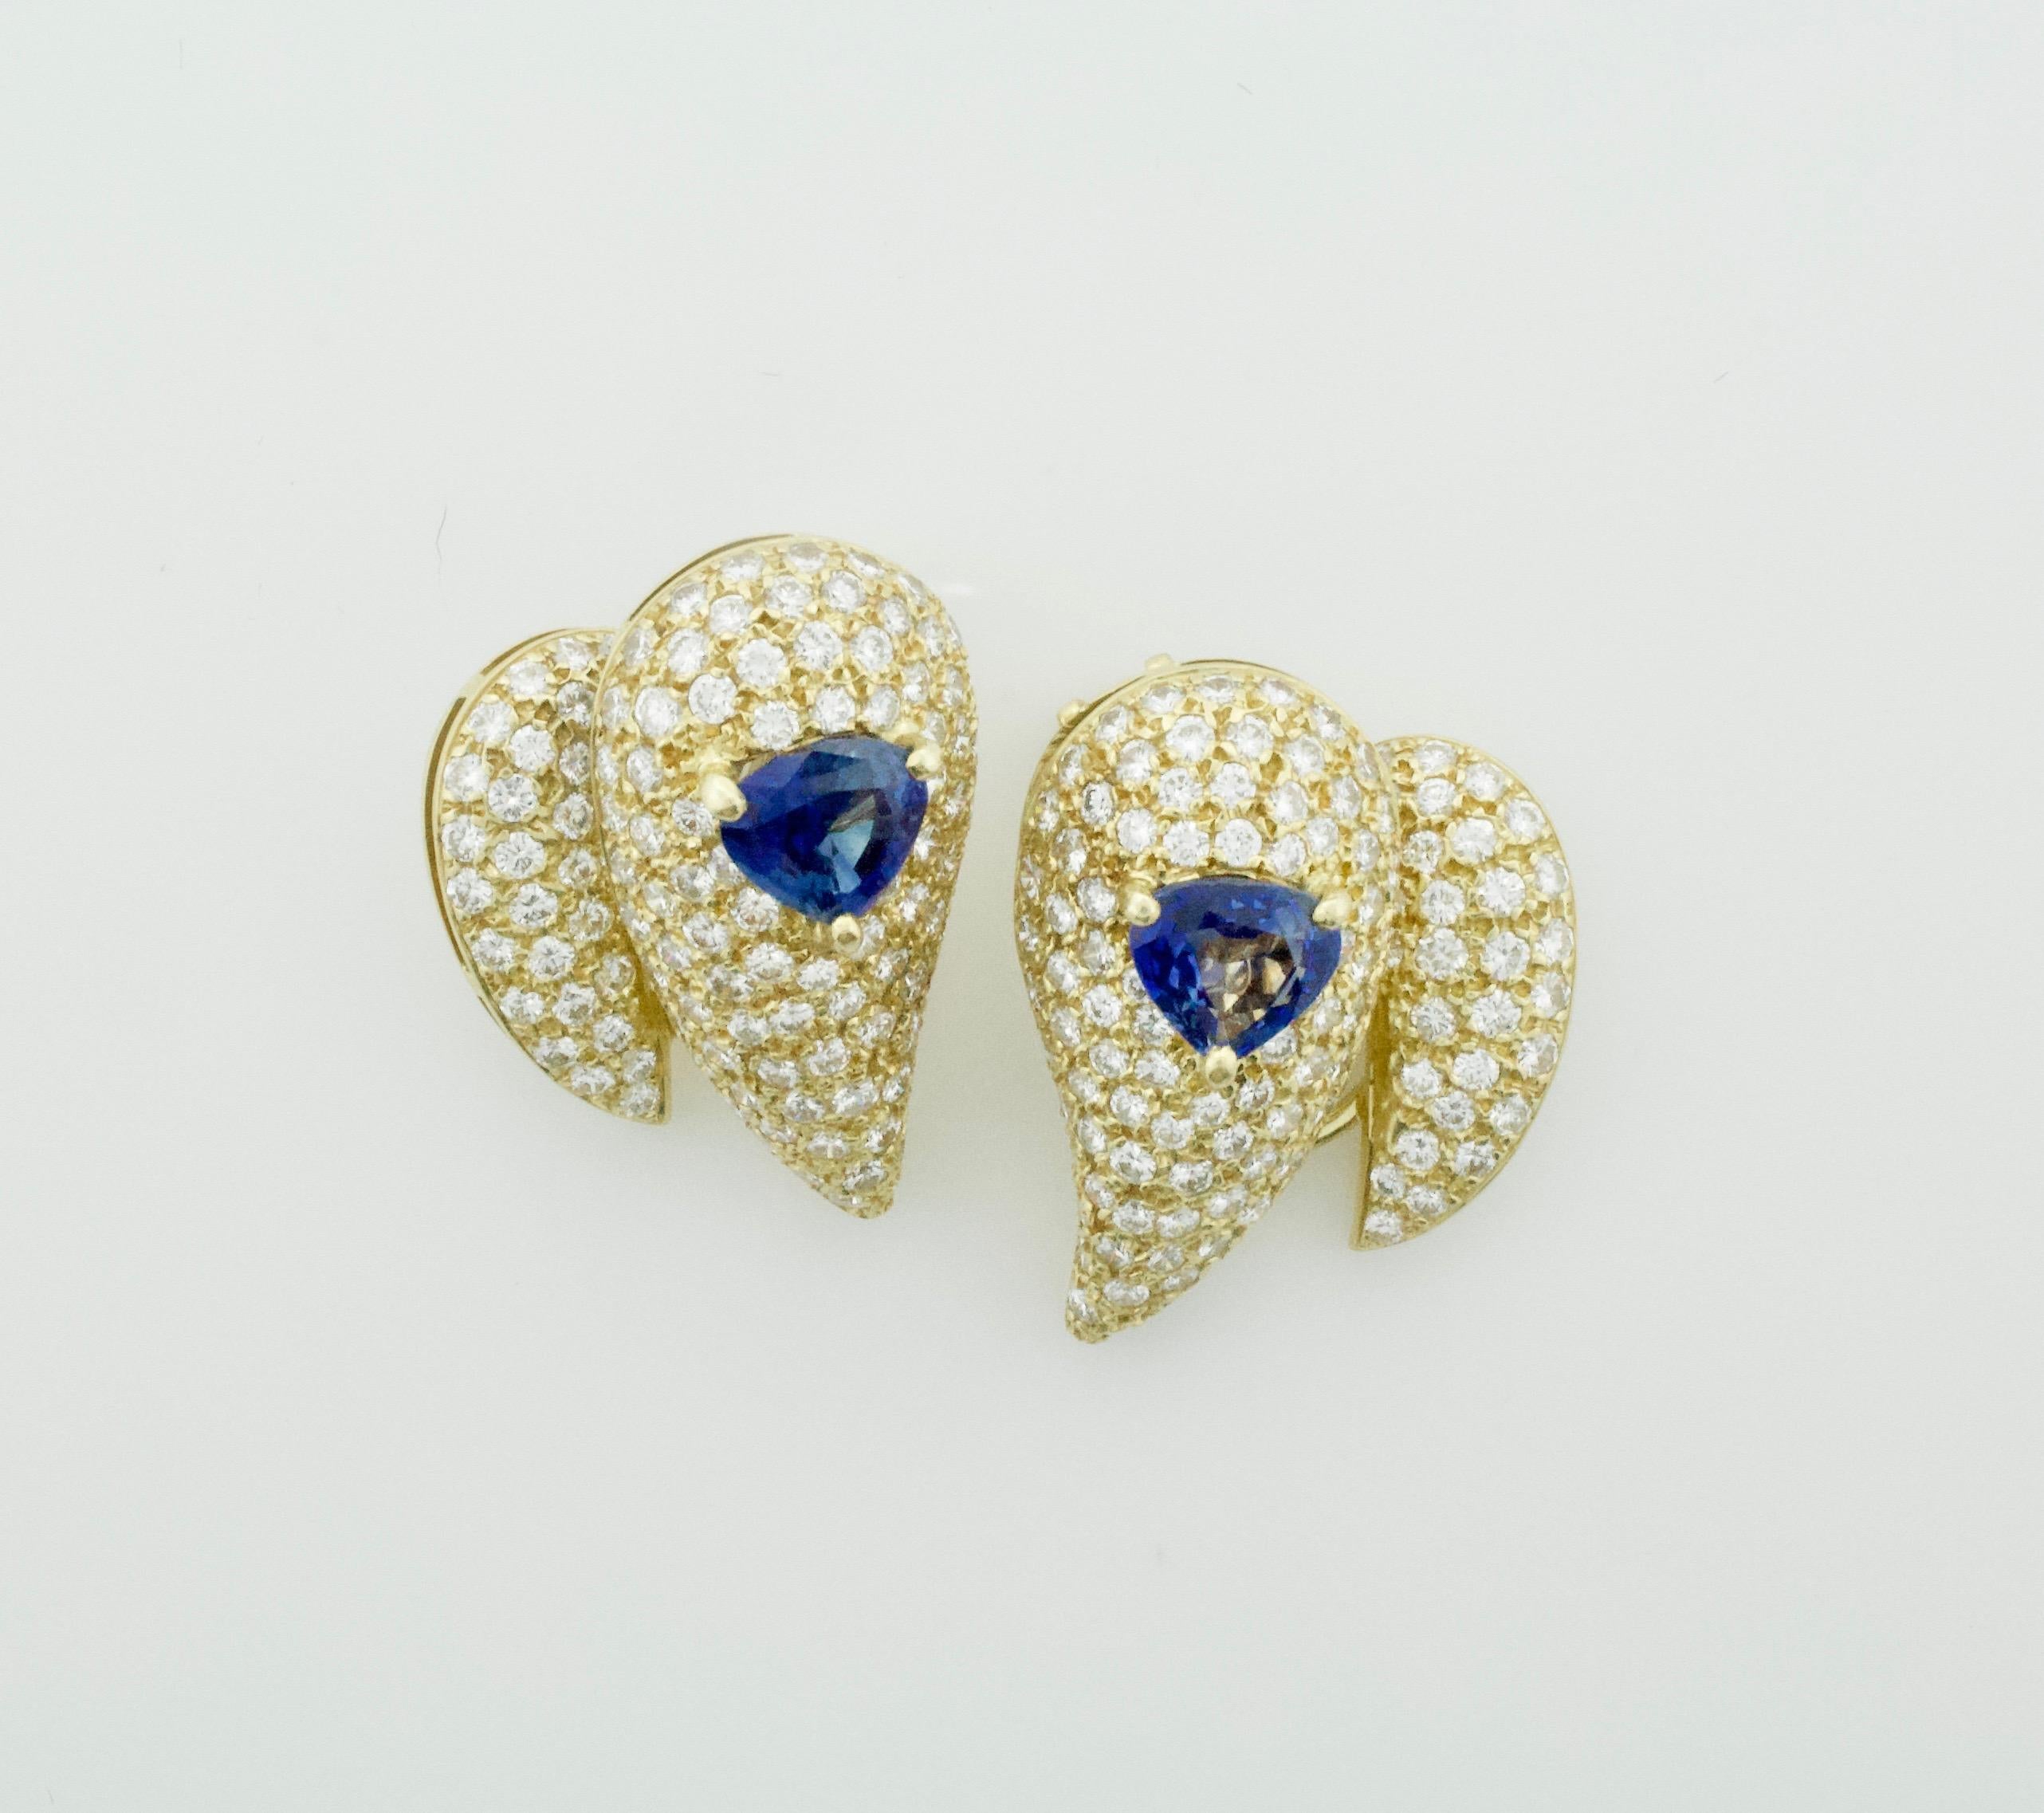 Sabbadini Unique Sapphire and Diamond Earrings in 18k Sap = 3.00 Dia = 7.00 cts.
Two Fancy Cut Sapphires Weighing 3.00 Carats Approximately [bright with no imperfections visible to the naked eye]
Two Hundred and Fifty Eight Round Brilliant Cut